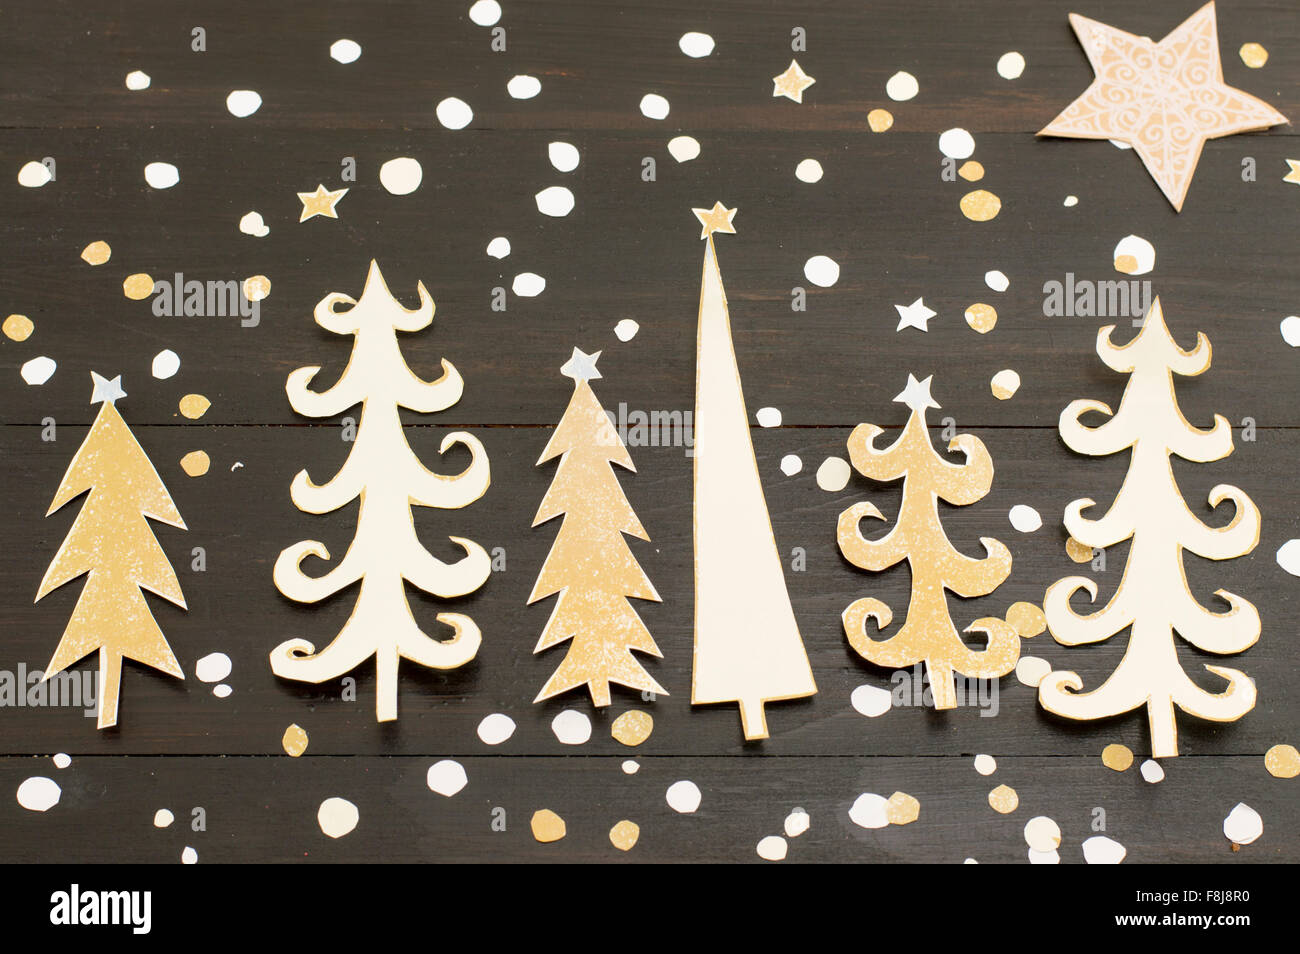 Christmas tree made out of paper with cut out star shapes Stock Photo